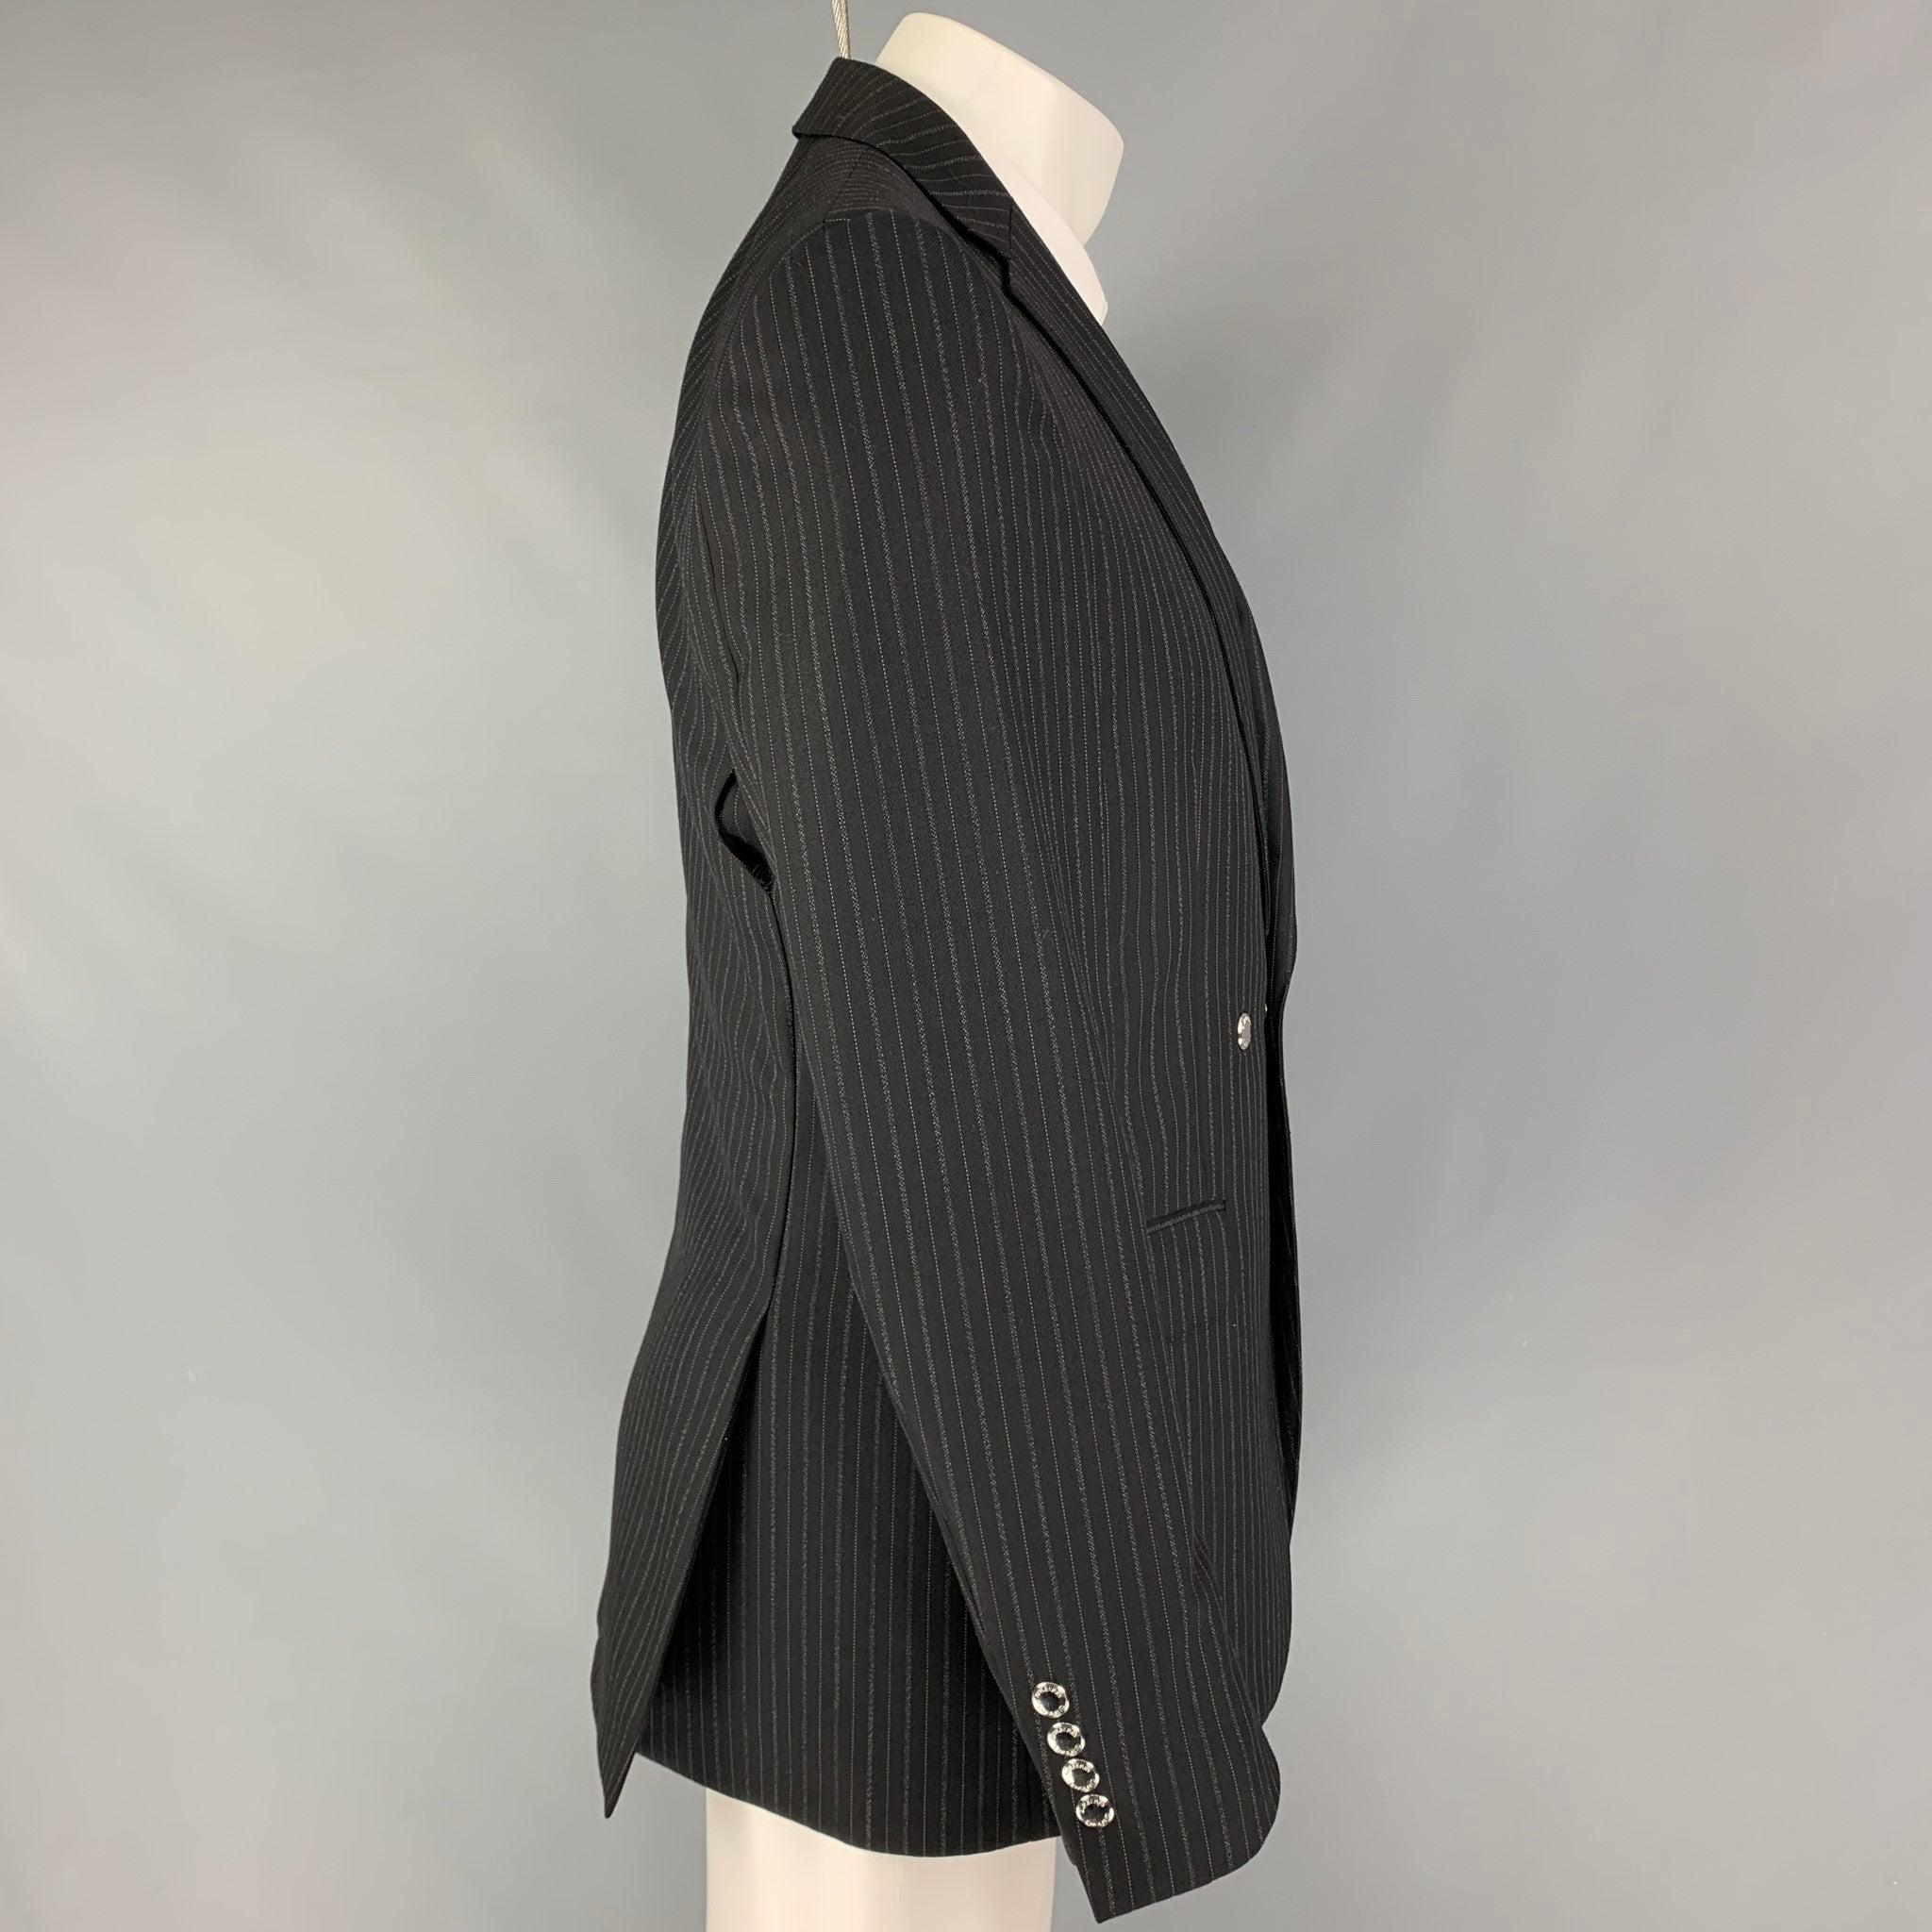 BURBERRY
sport coat comes in a black & grey stripe wool with a full liner featuring a notch lapel, flap pockets, double back vent, silver tone hardware, and a single button closure. Made in Italy. Very Good Pre-Owned Condition. Small tear at hem. 